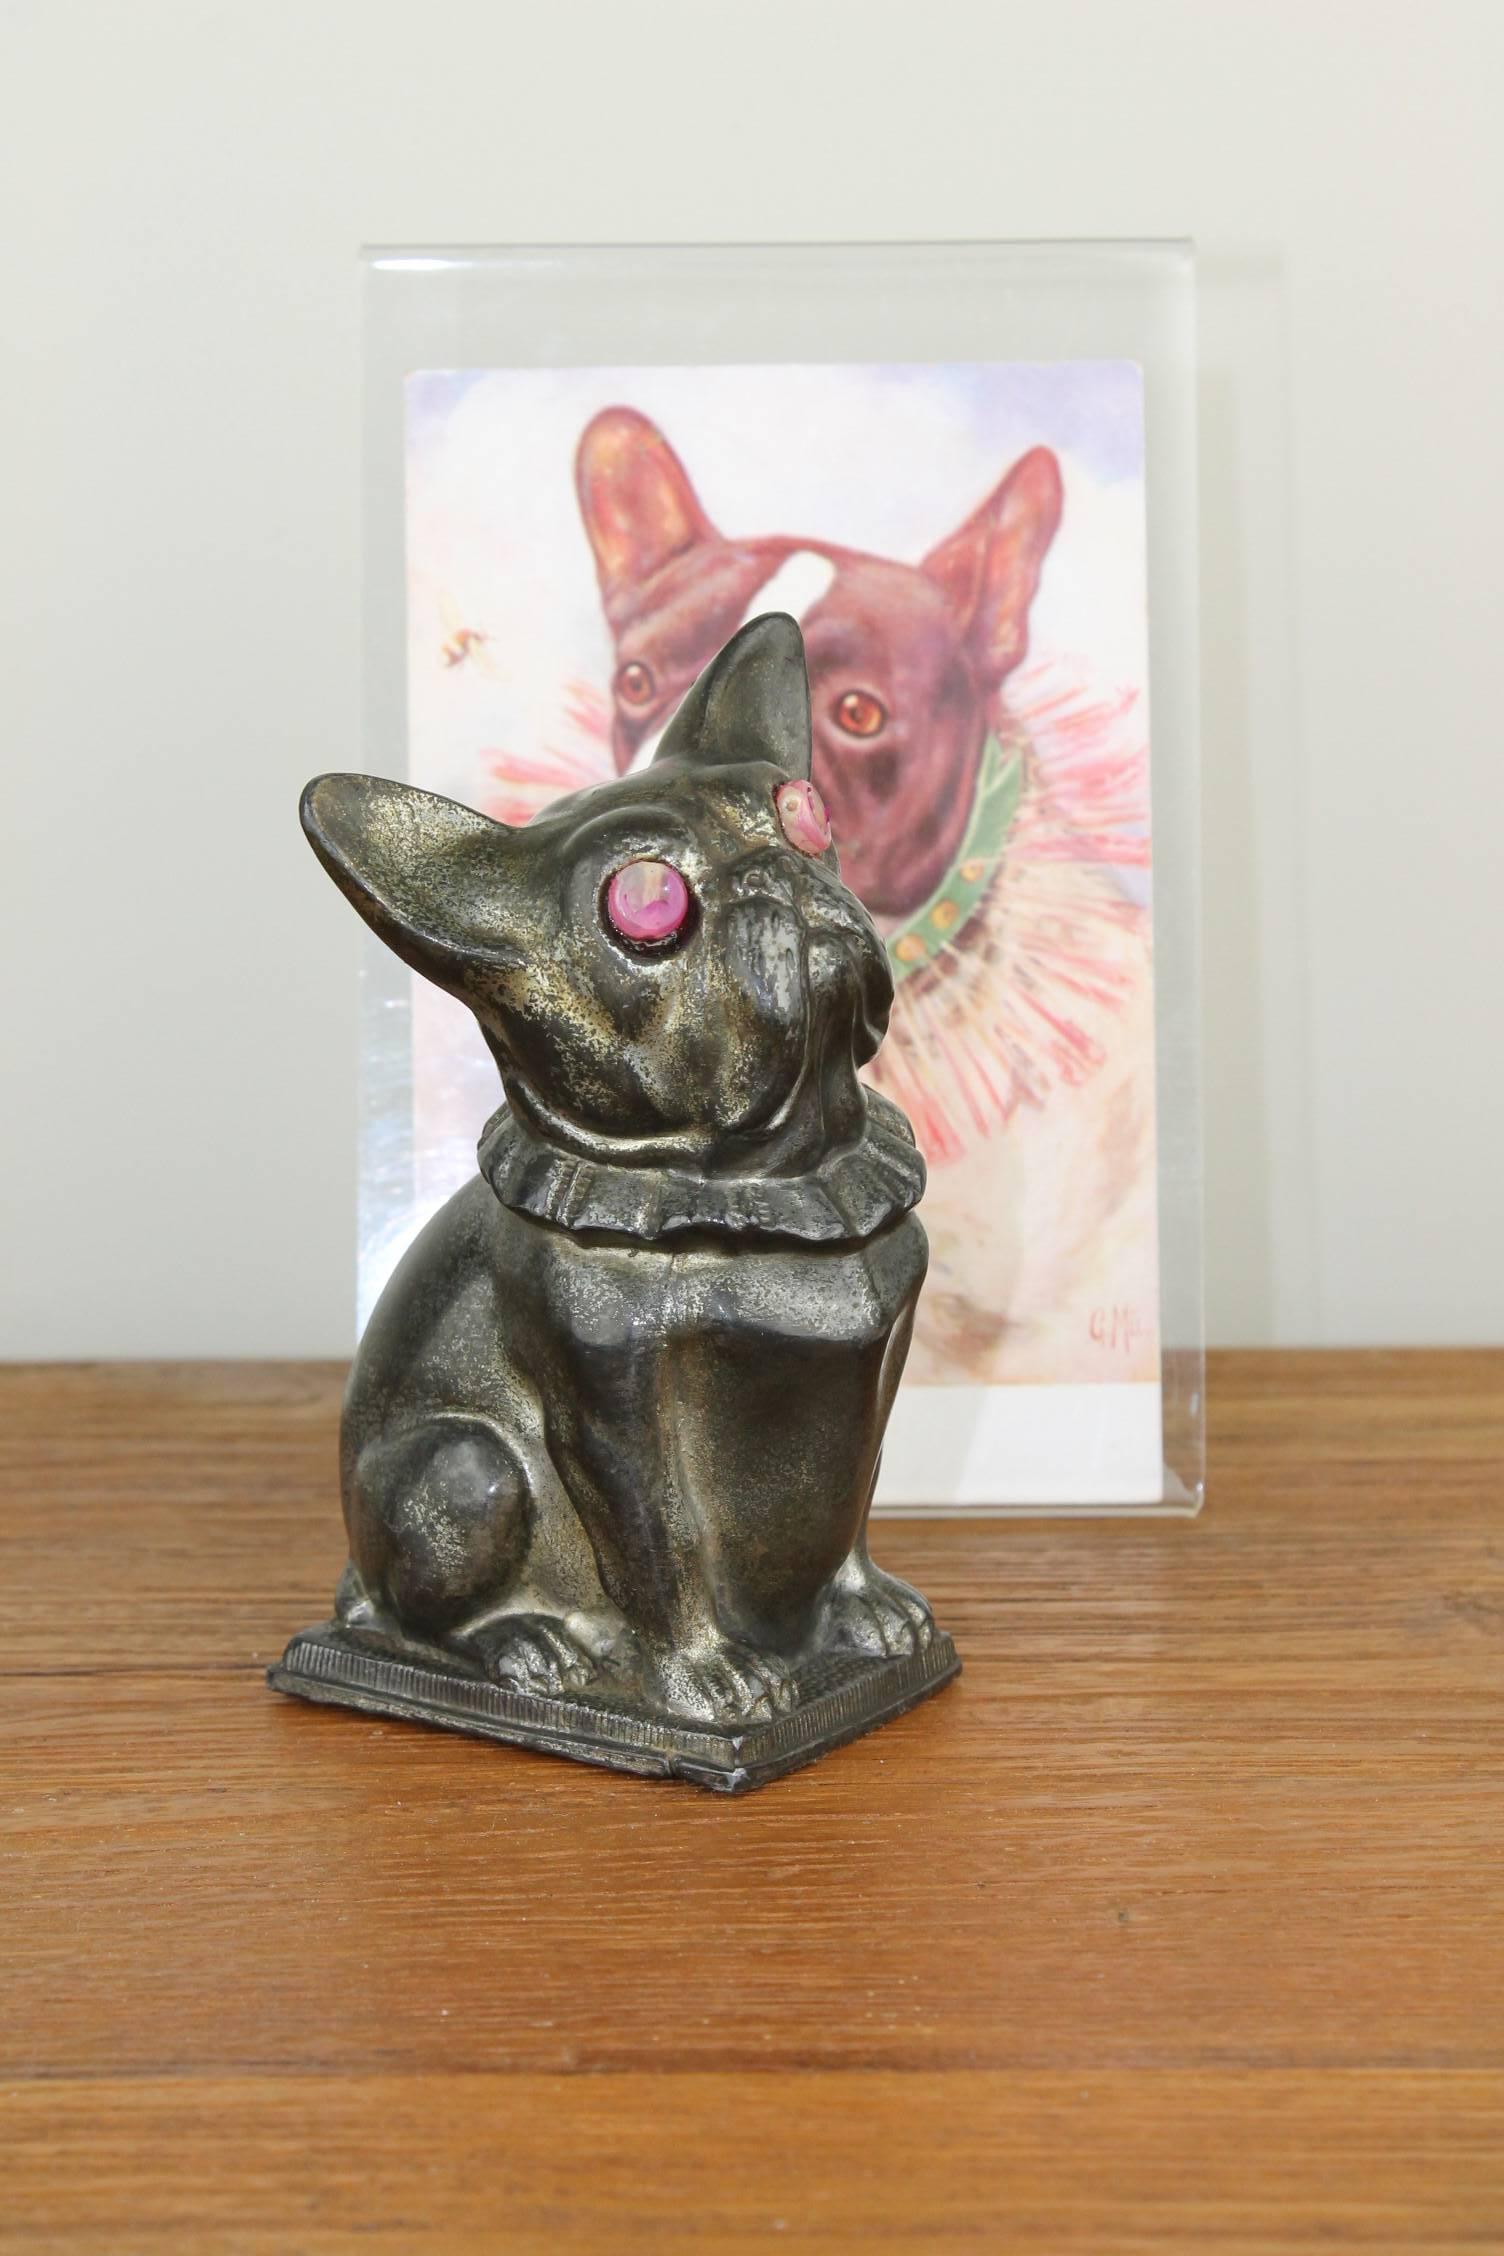 Lovely Art Deco money box in the shape of a French bulldog figurine - dog figure. Dates from the 1920s-1930s.
Made in silvered metal, but over the years the silver is almost gone because of use. On the bottom there is a Lid to take out the money